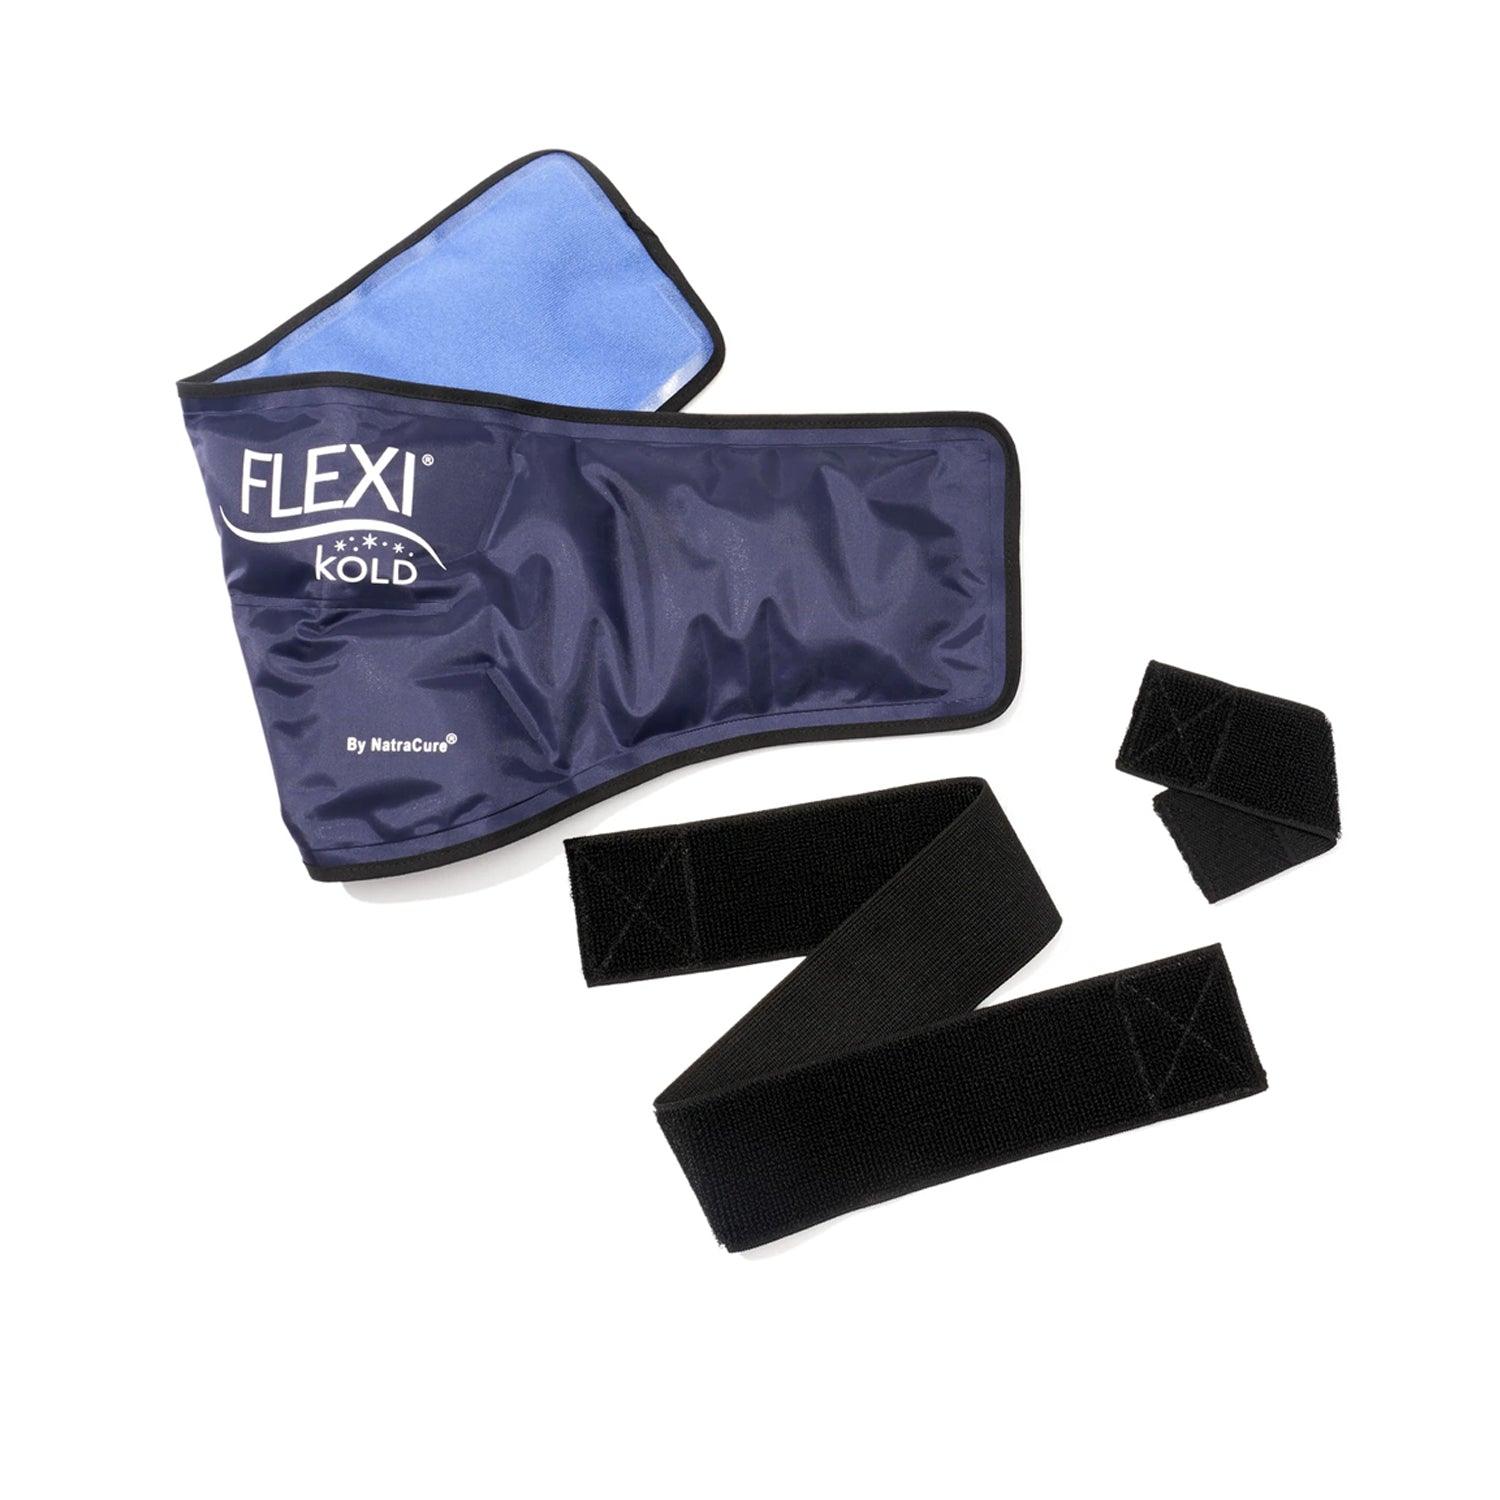 FlexiKold Neck Gel Cold Pack with 2 Straps